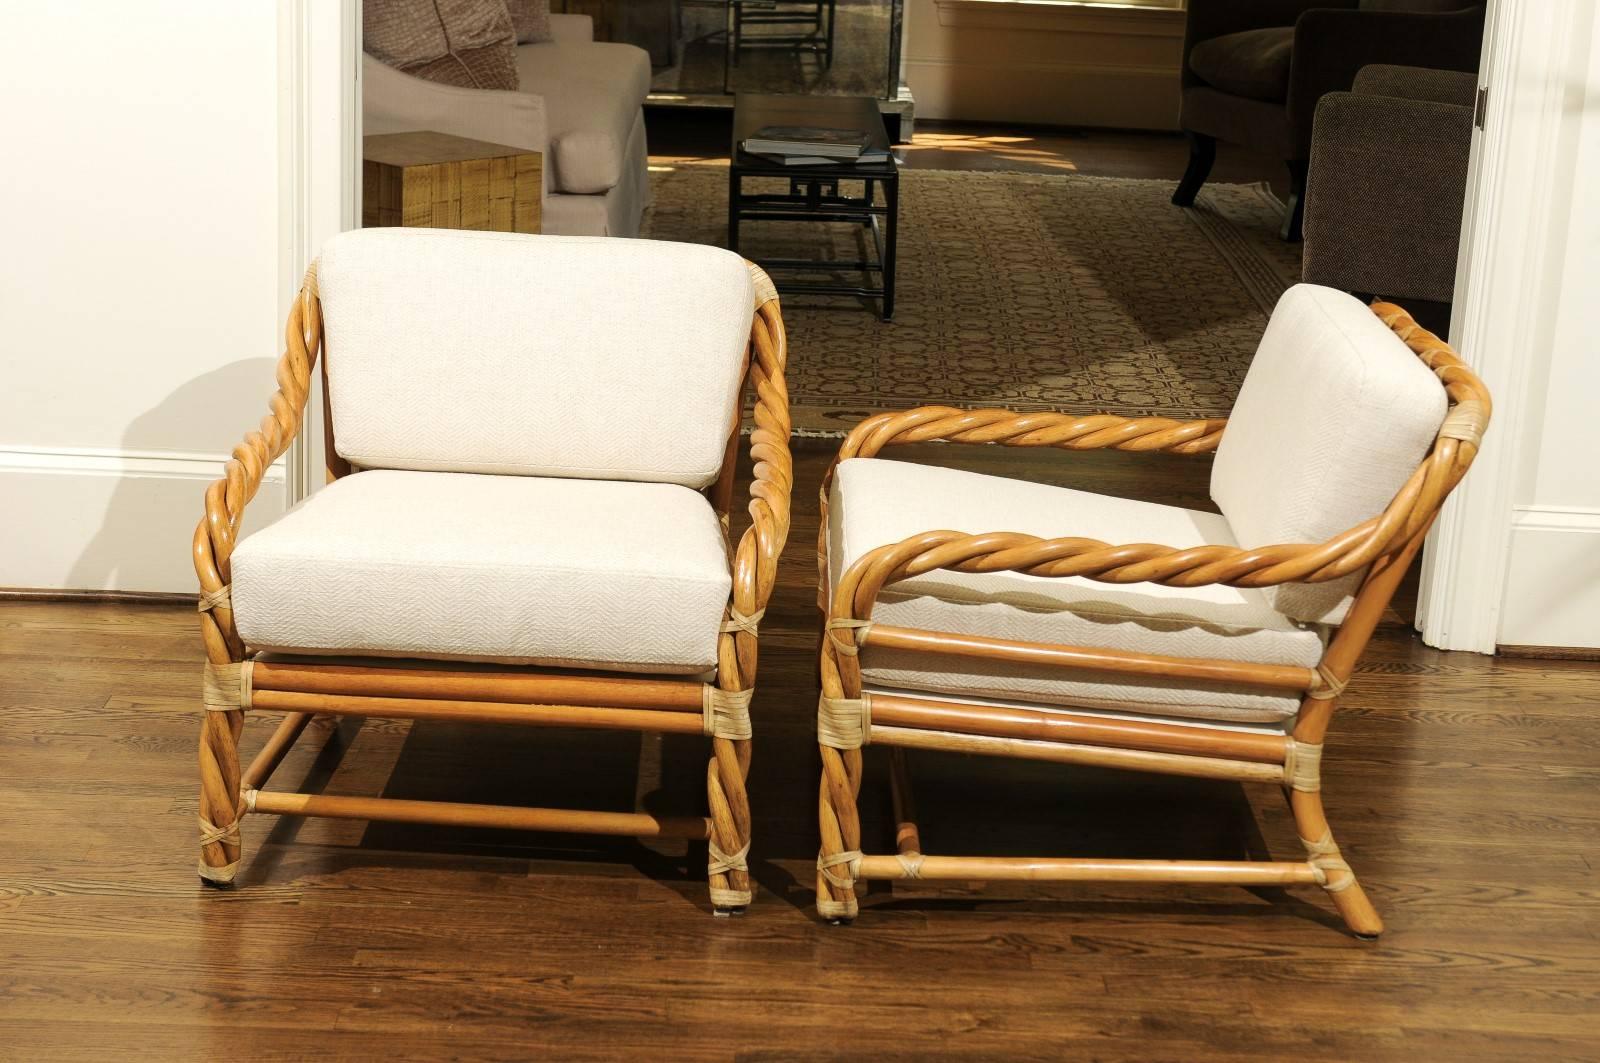 Leather Coveted Pair of Restored Braided Rattan Loungers by McGuire, circa 1980